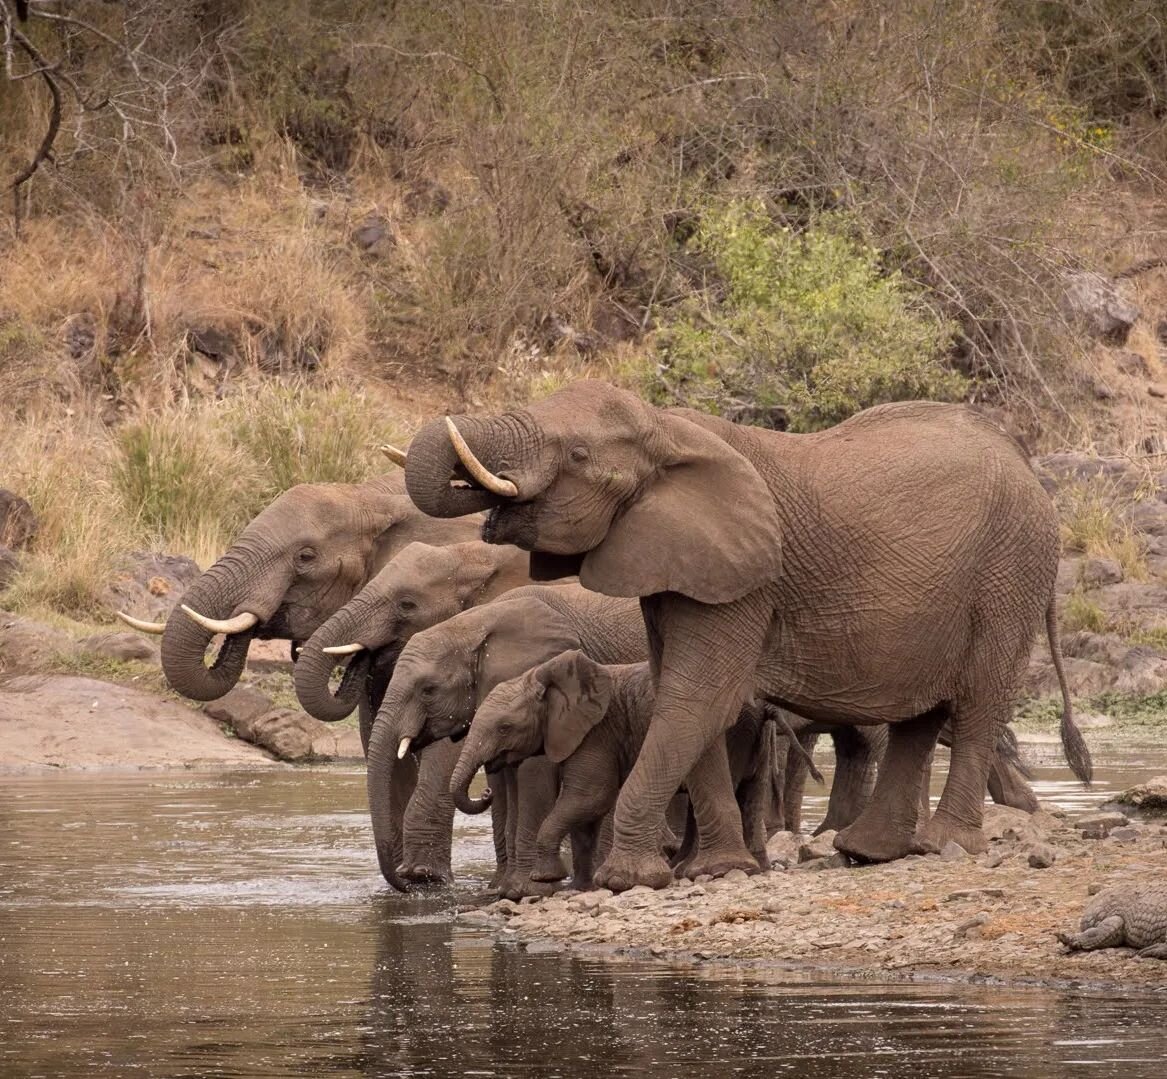 The things one sees when birdwatching by the water. Elephants are abundant in Kruger National Park. Though elephant poaching isn't as rampant there today as it has been in the recent past*, evidence of past poaching abounds in the lack of many big &q